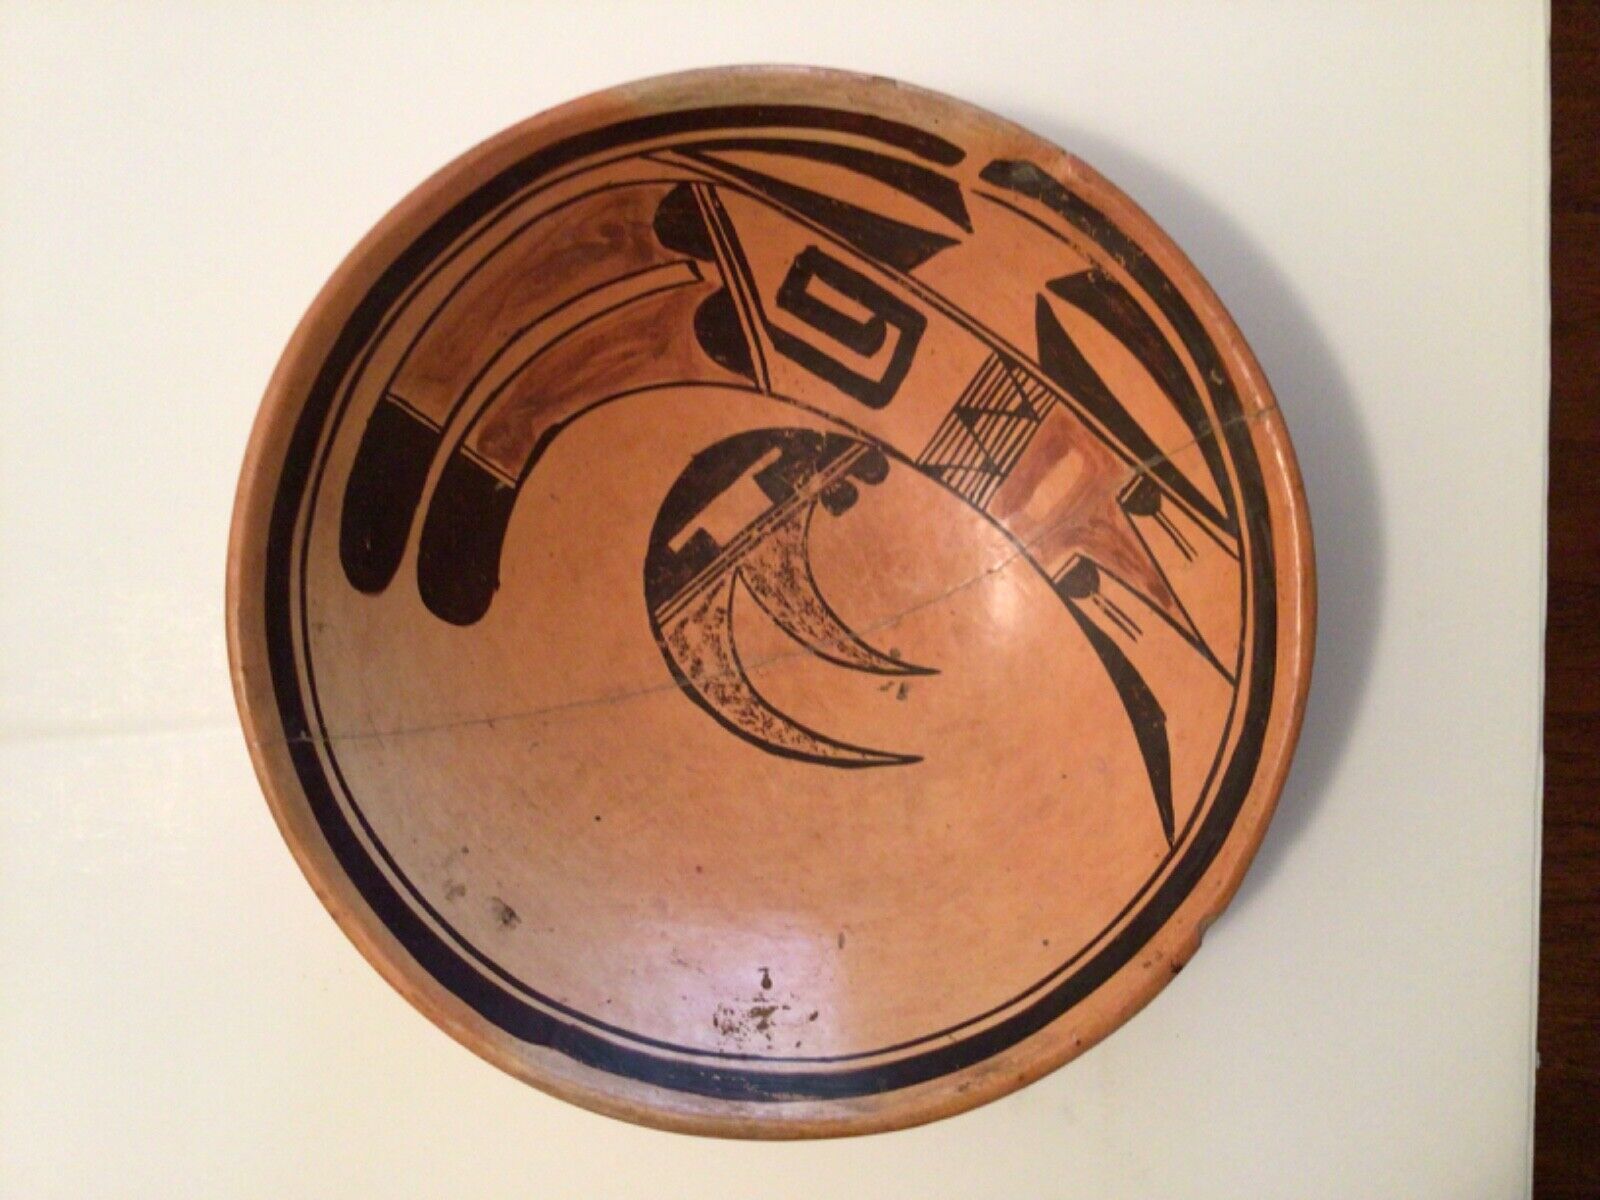 EARLY HOPI BOWL  -  LIKELY NAMPEYO (1859-1942)  -  EARLY “HOPI VILLAGES” LABEL